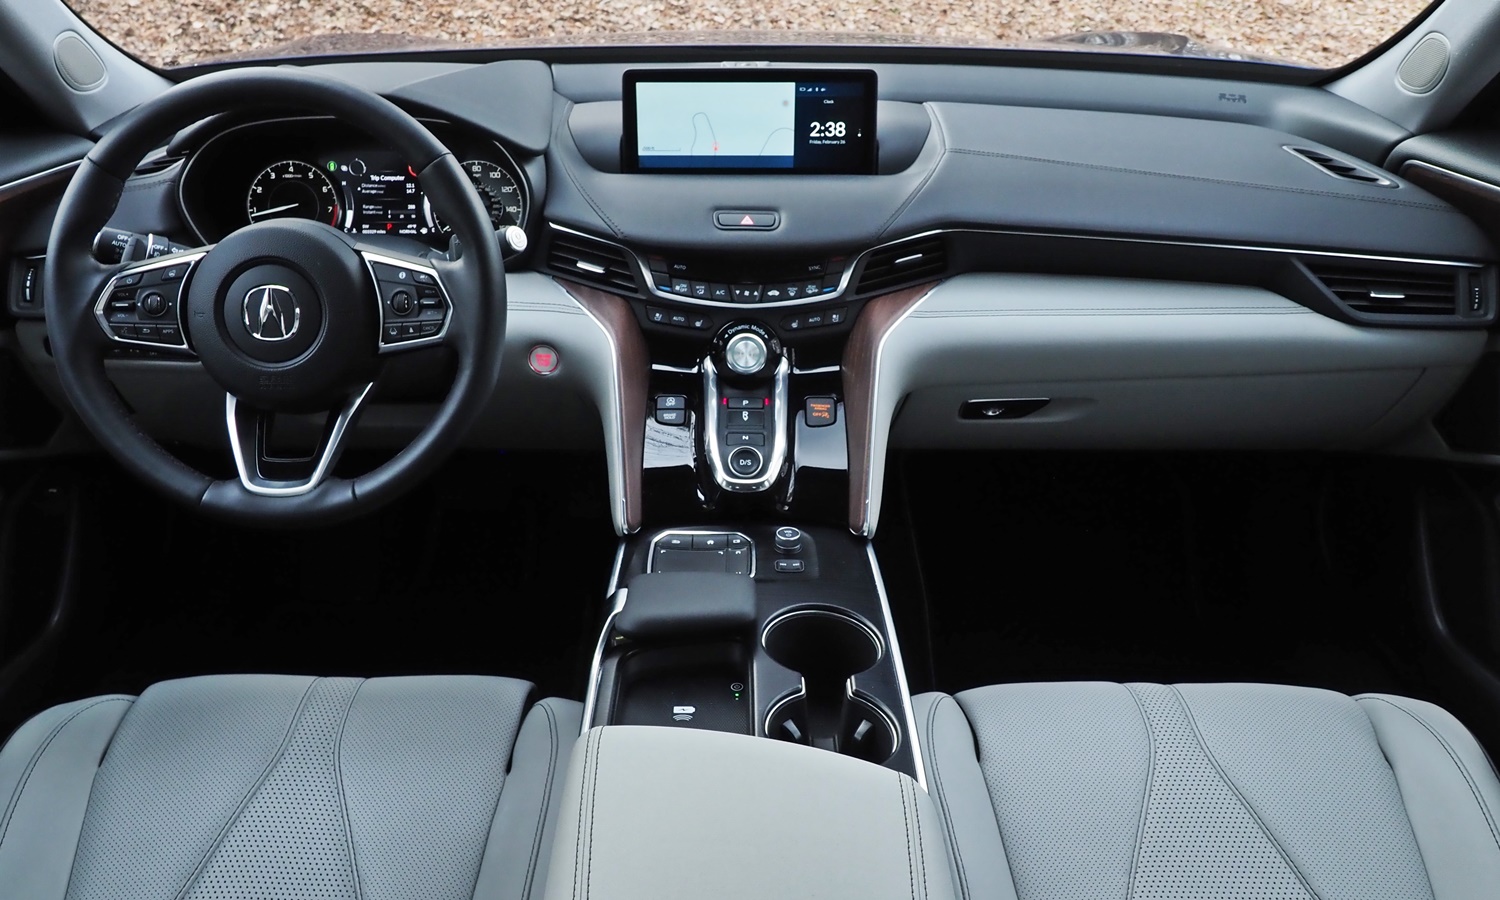 Acura TLX Photos: Acura TLX instrument panel full width